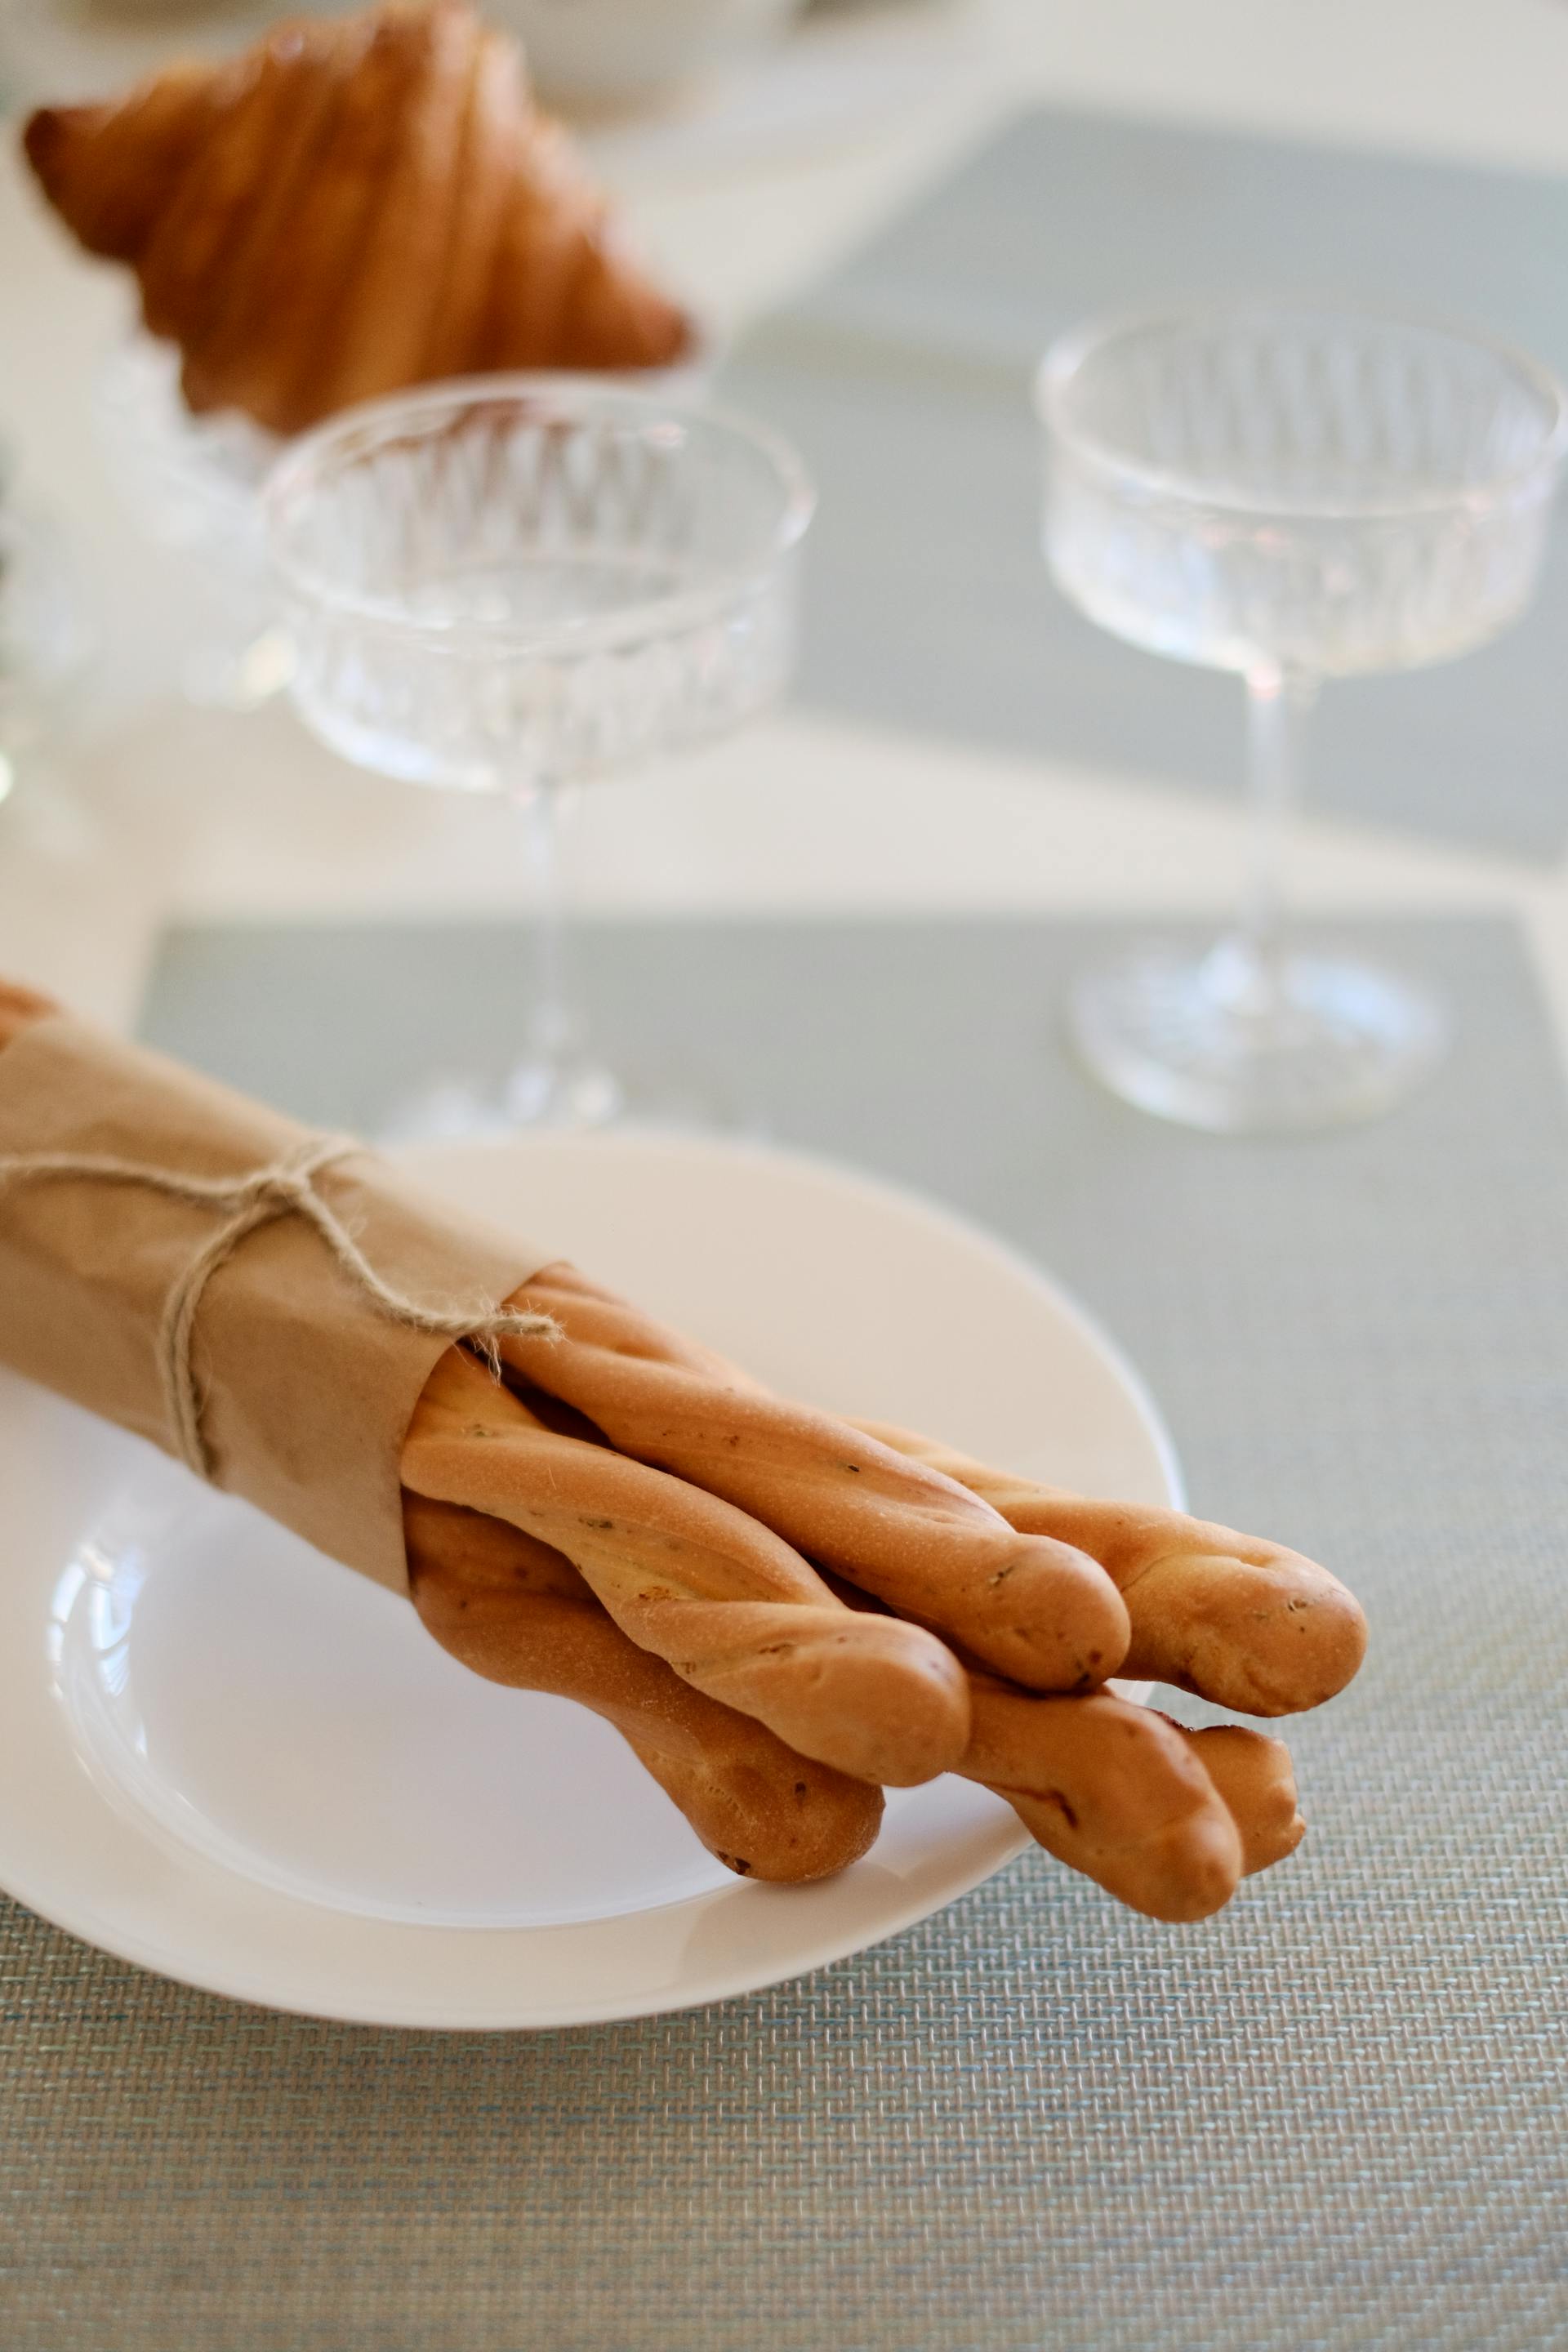 Breadsticks on a plate | Source: Pexels